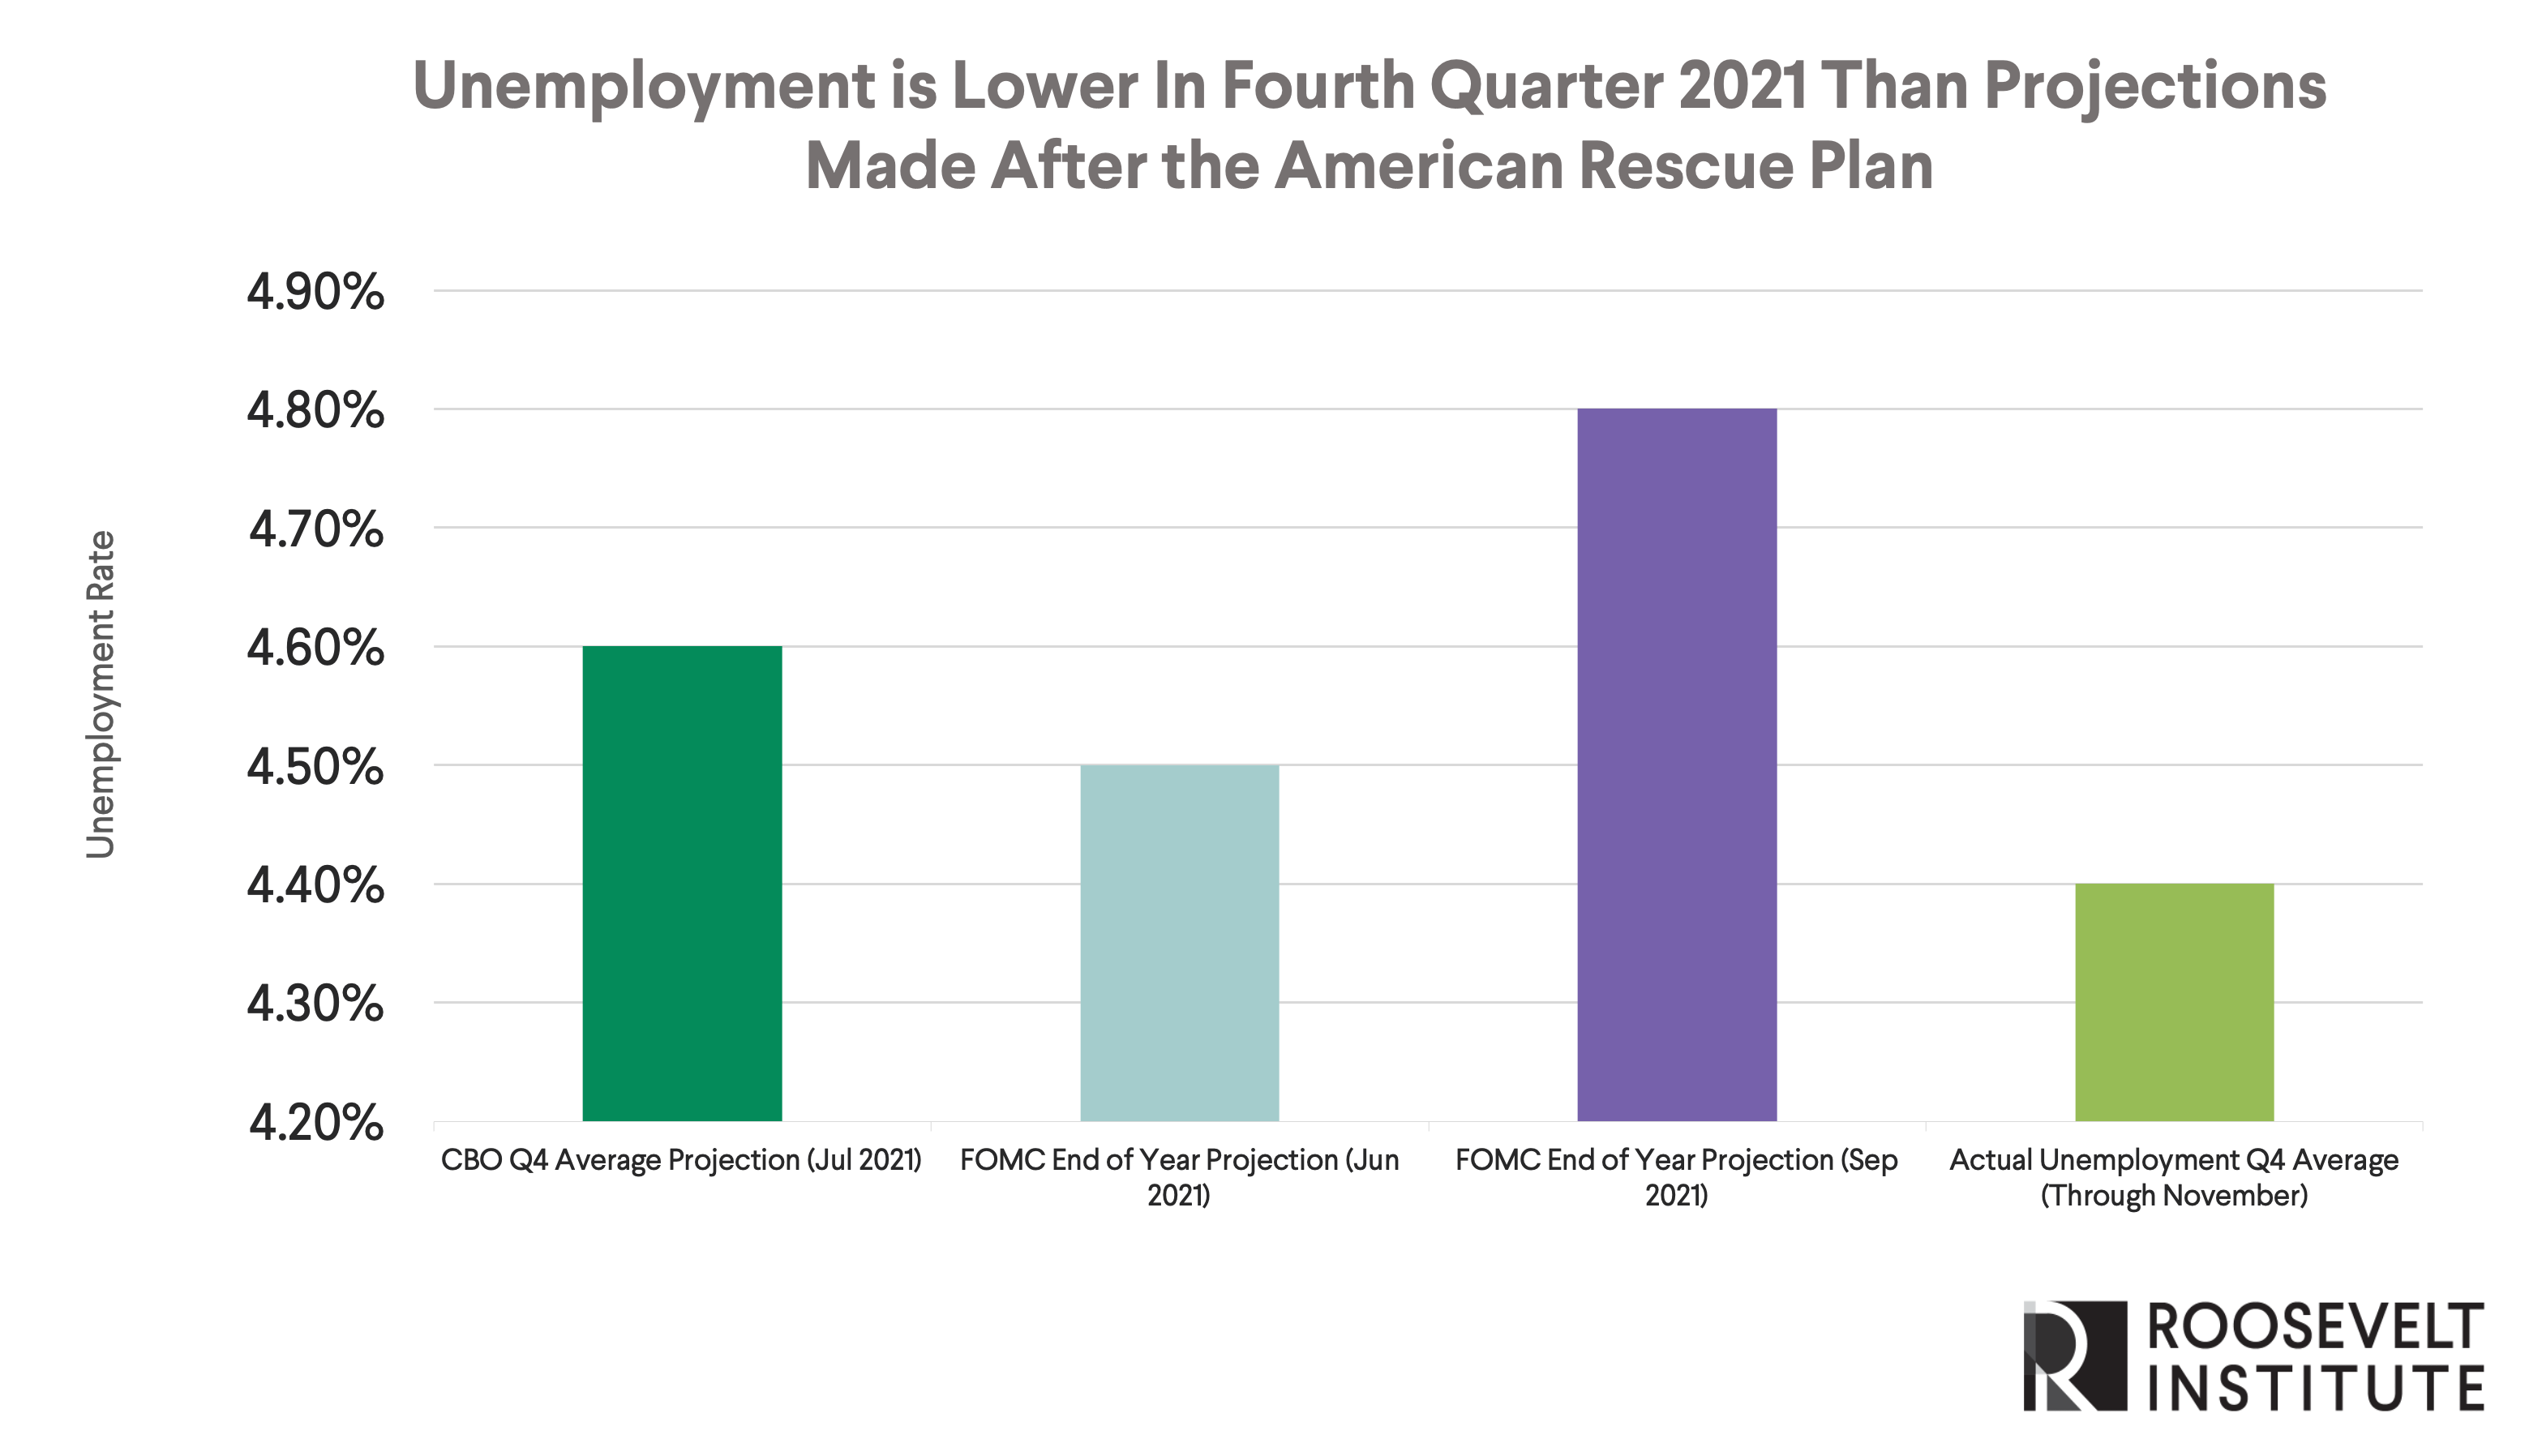 Chart showing unemployment is lower in Q4 2021 than projections made after the American Rescue Plan